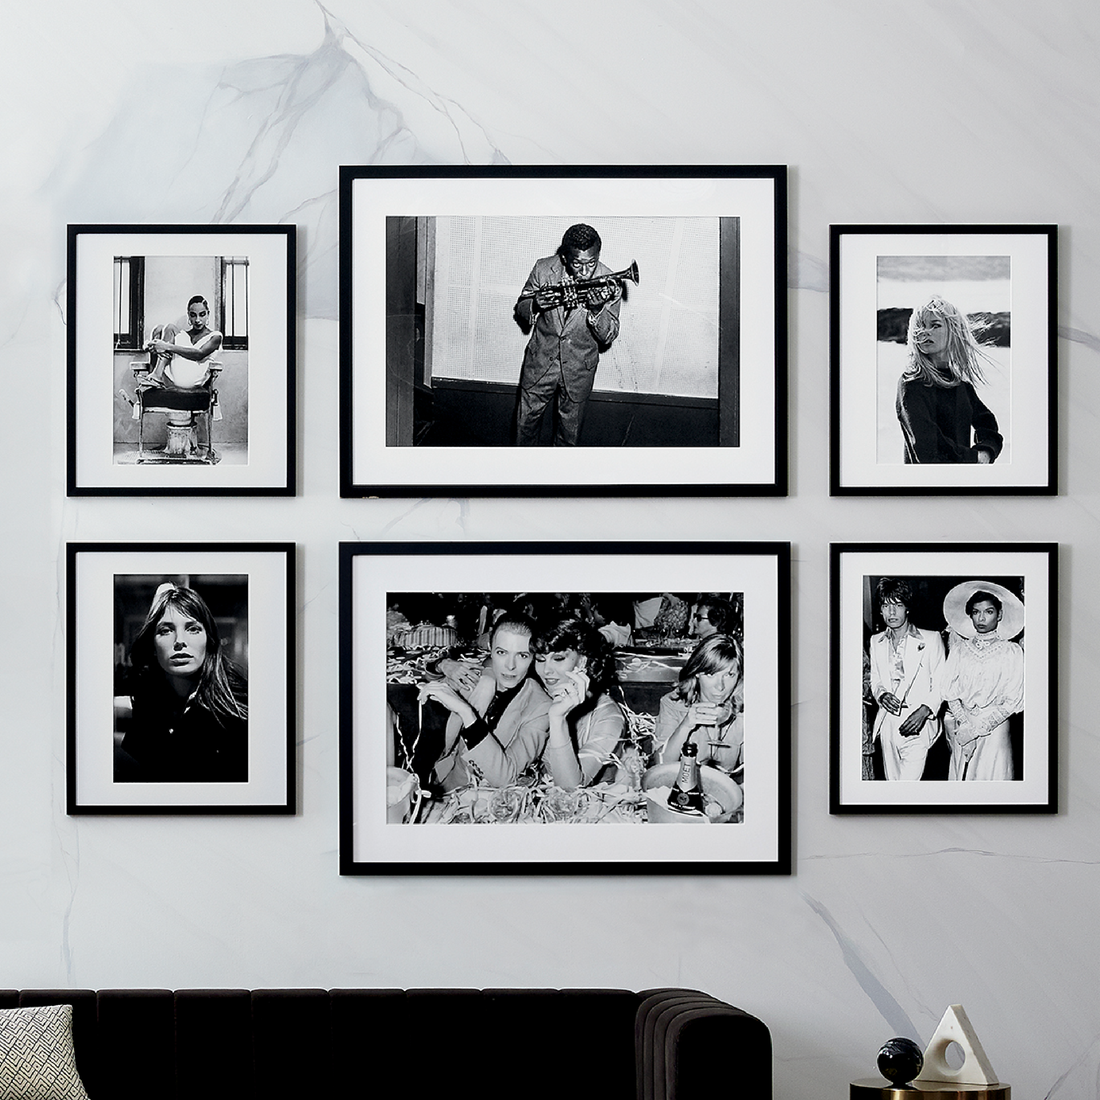 GALLERY WALL IDEAS: 5 KEY DESIGN PRINCIPLES TO KEEP IN MIND